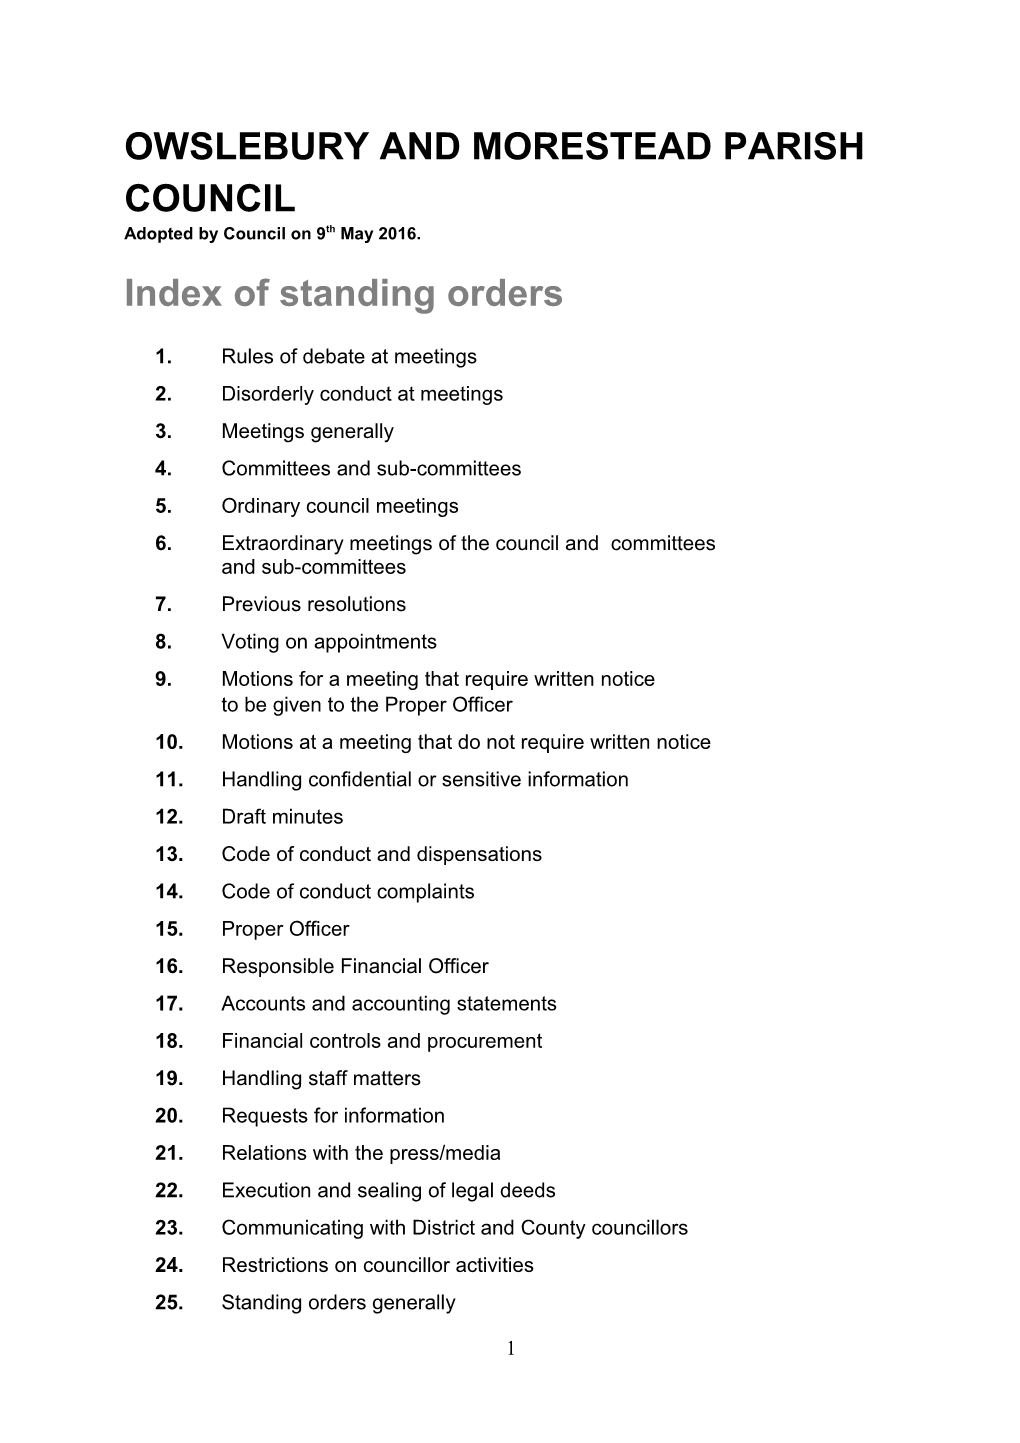 Index of Standing Orders